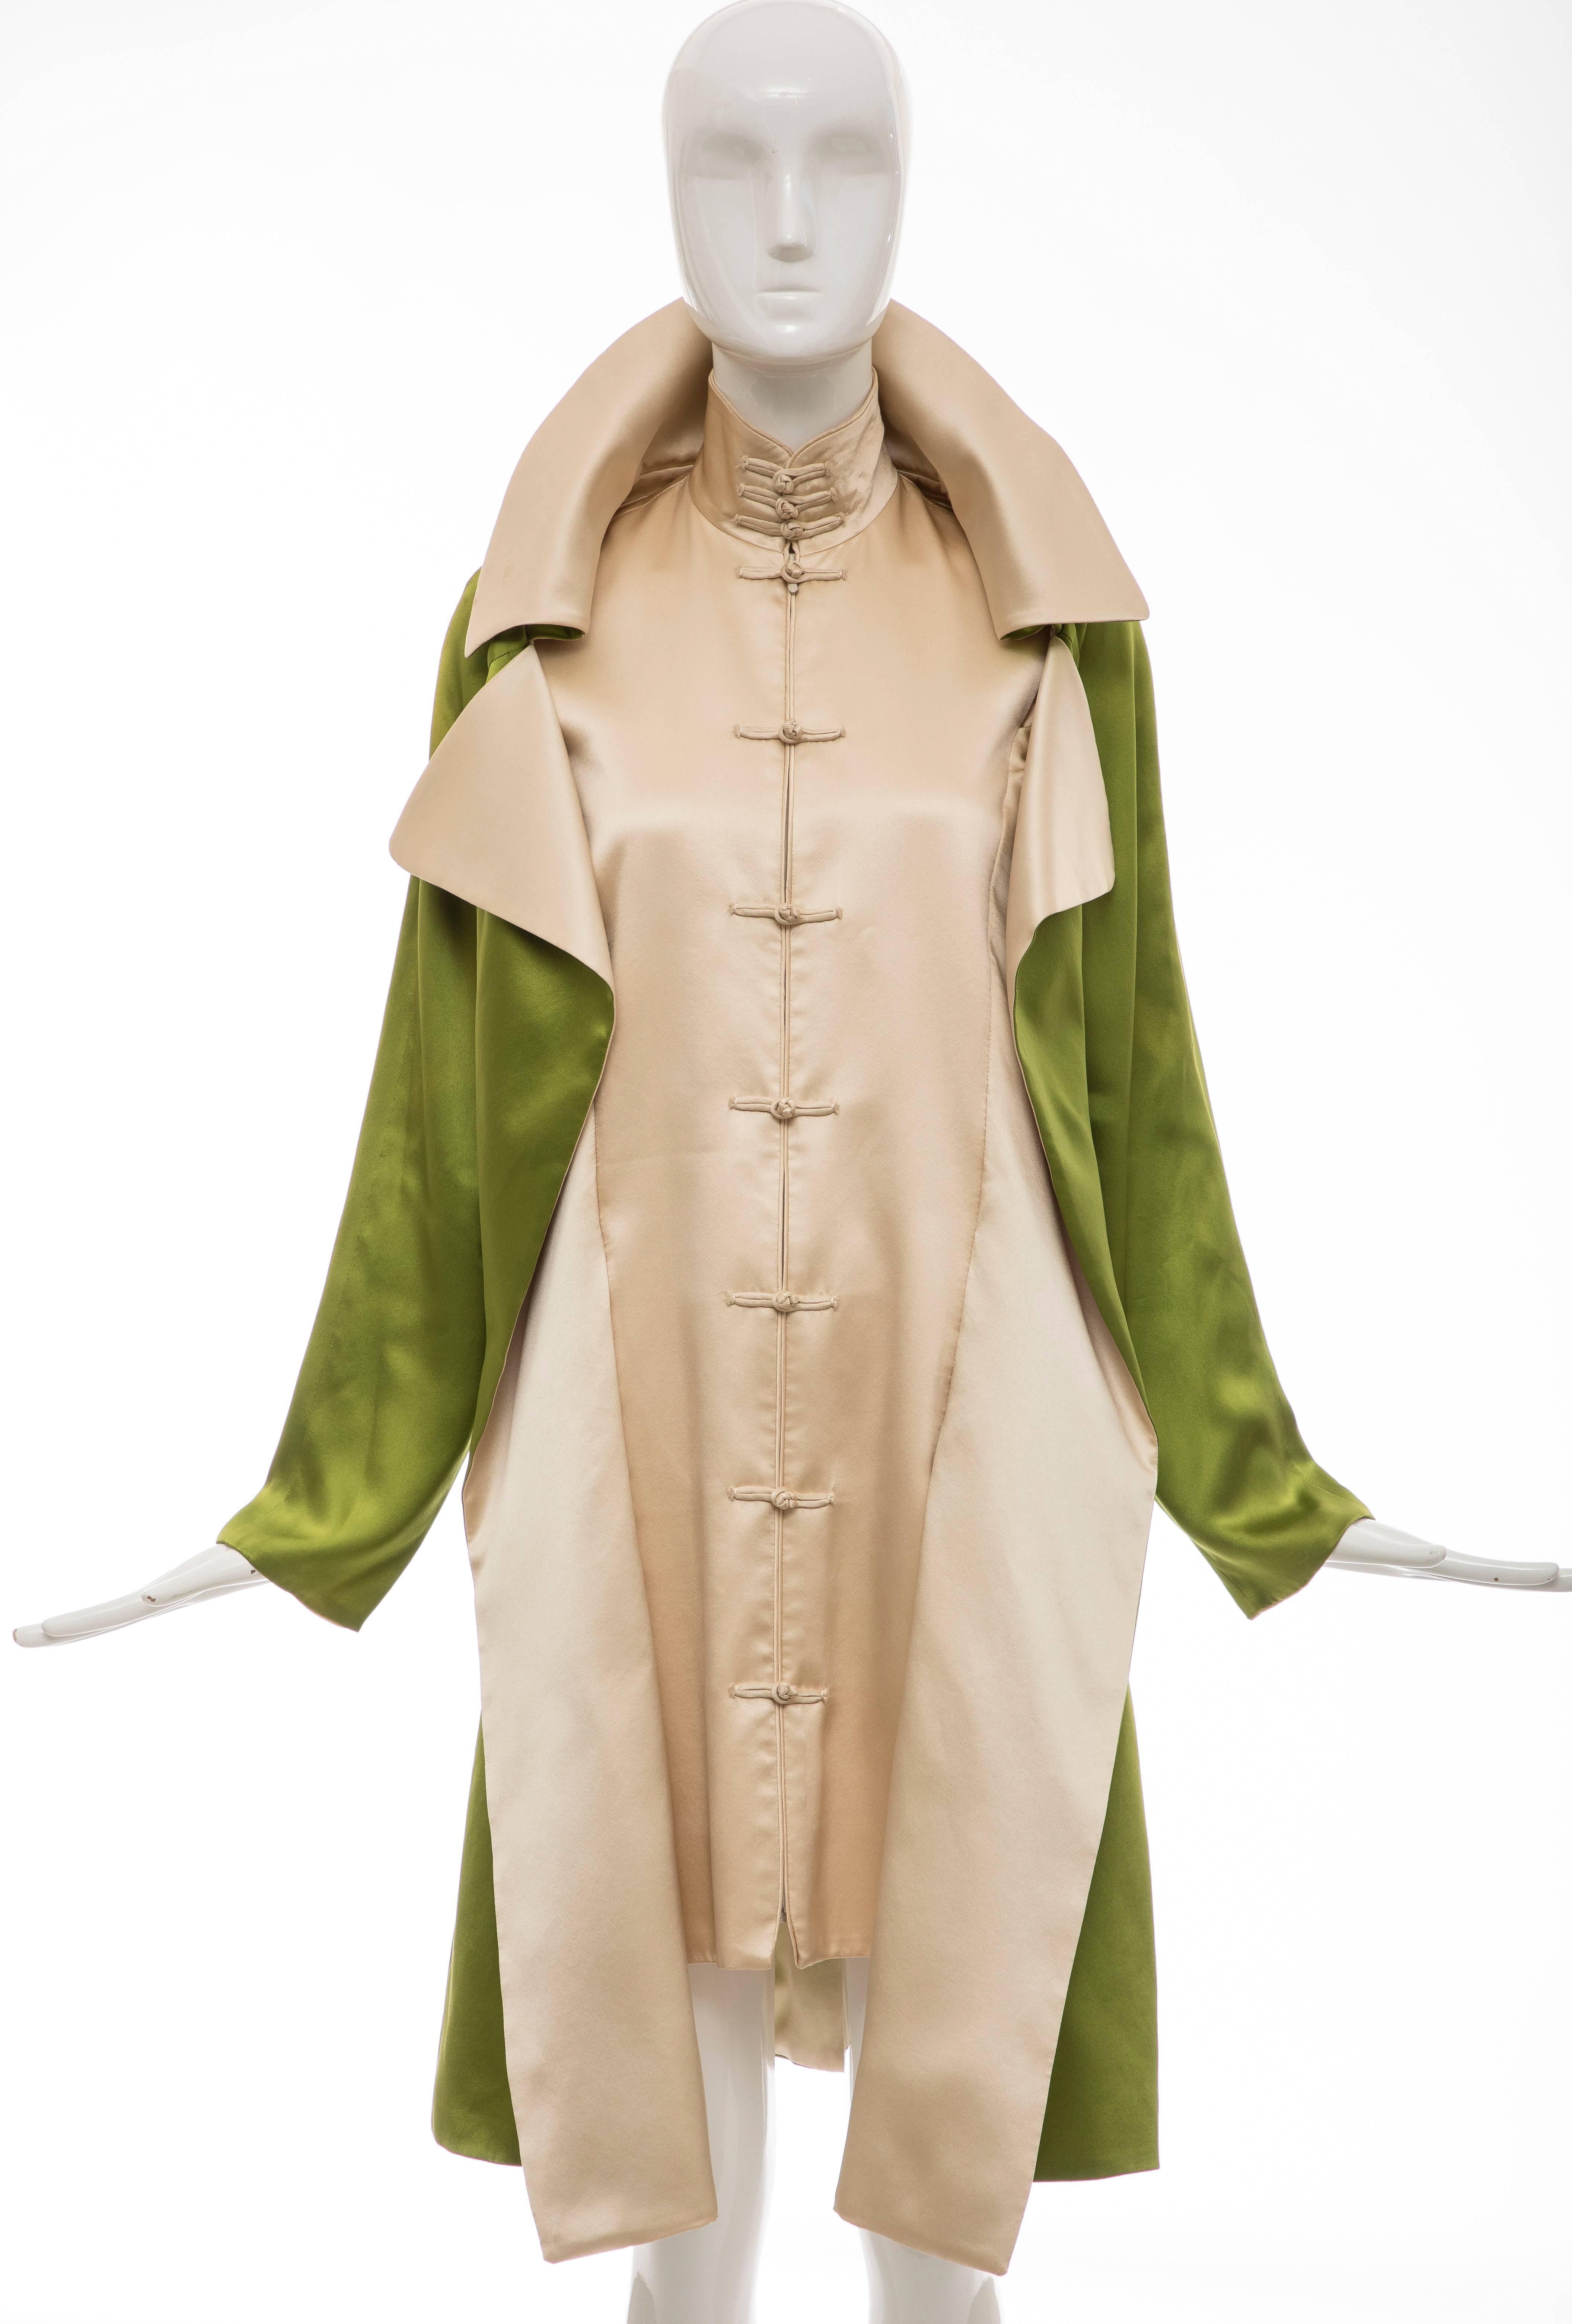 Jean Paul Gaultier, Autumn-Winter 2010 silk charmeuse dress coat with dual welt pockets, toggle closures at front and concealed zip closure at front.

Bust: 36, Waist 36, Shoulder 16, Length 39, Sleeve 23.5
